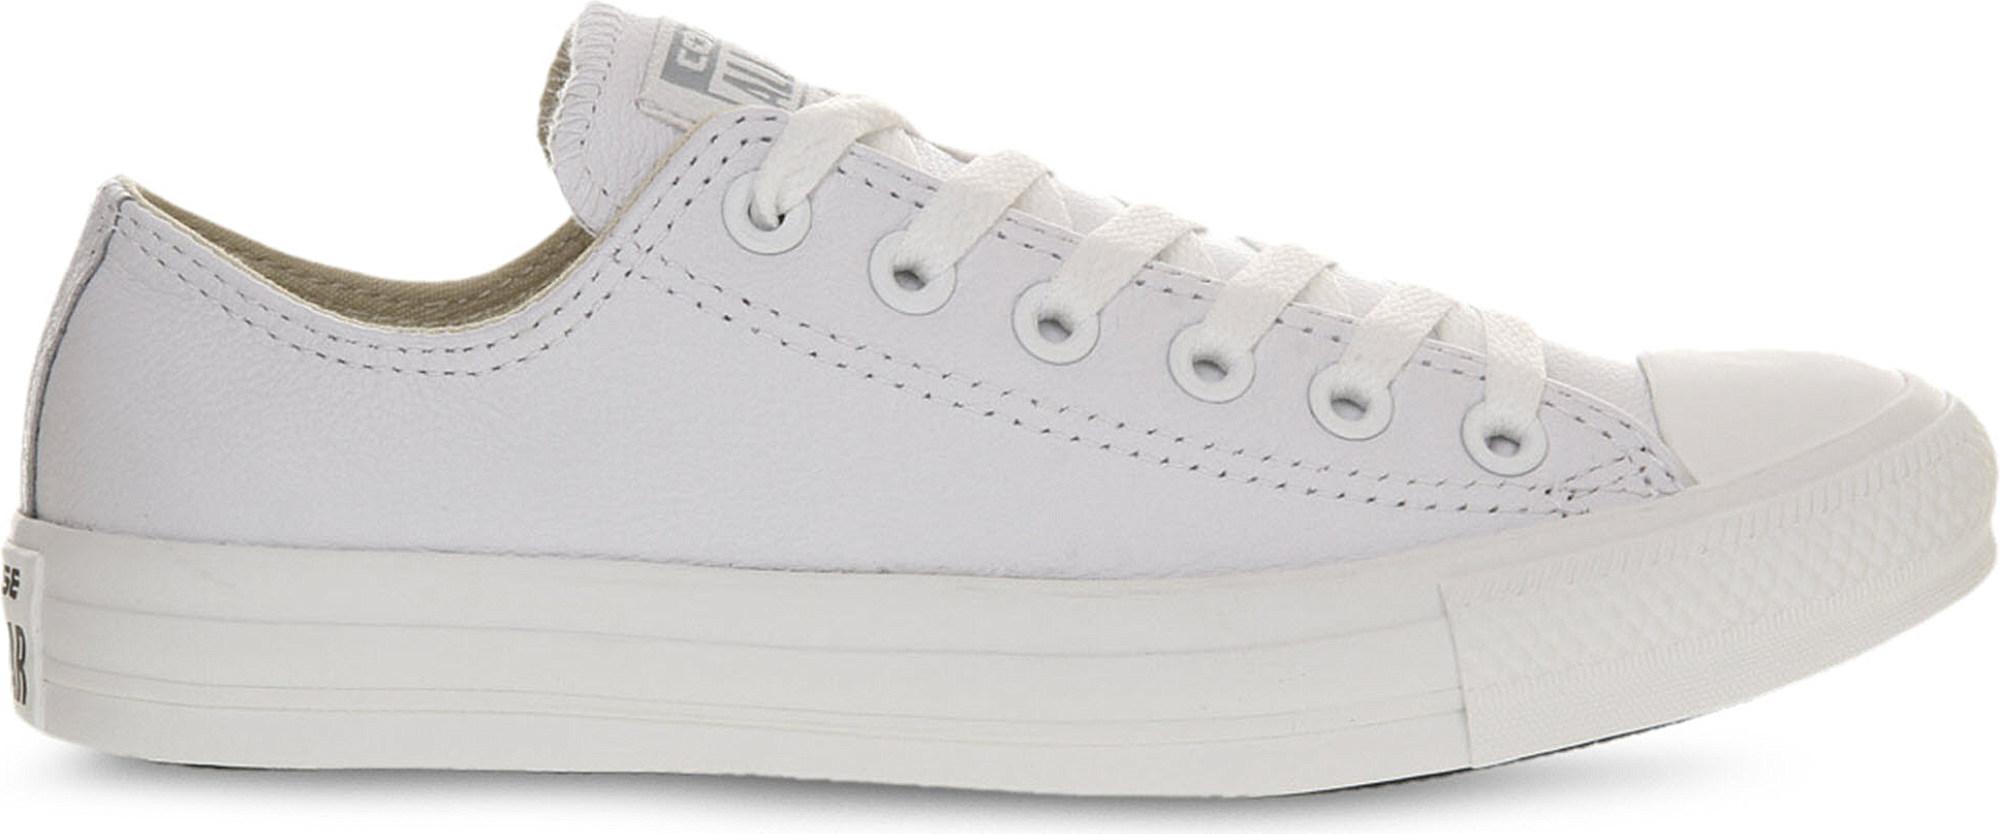 Lyst - Converse All Star Low-top Leather Trainers in White for Men